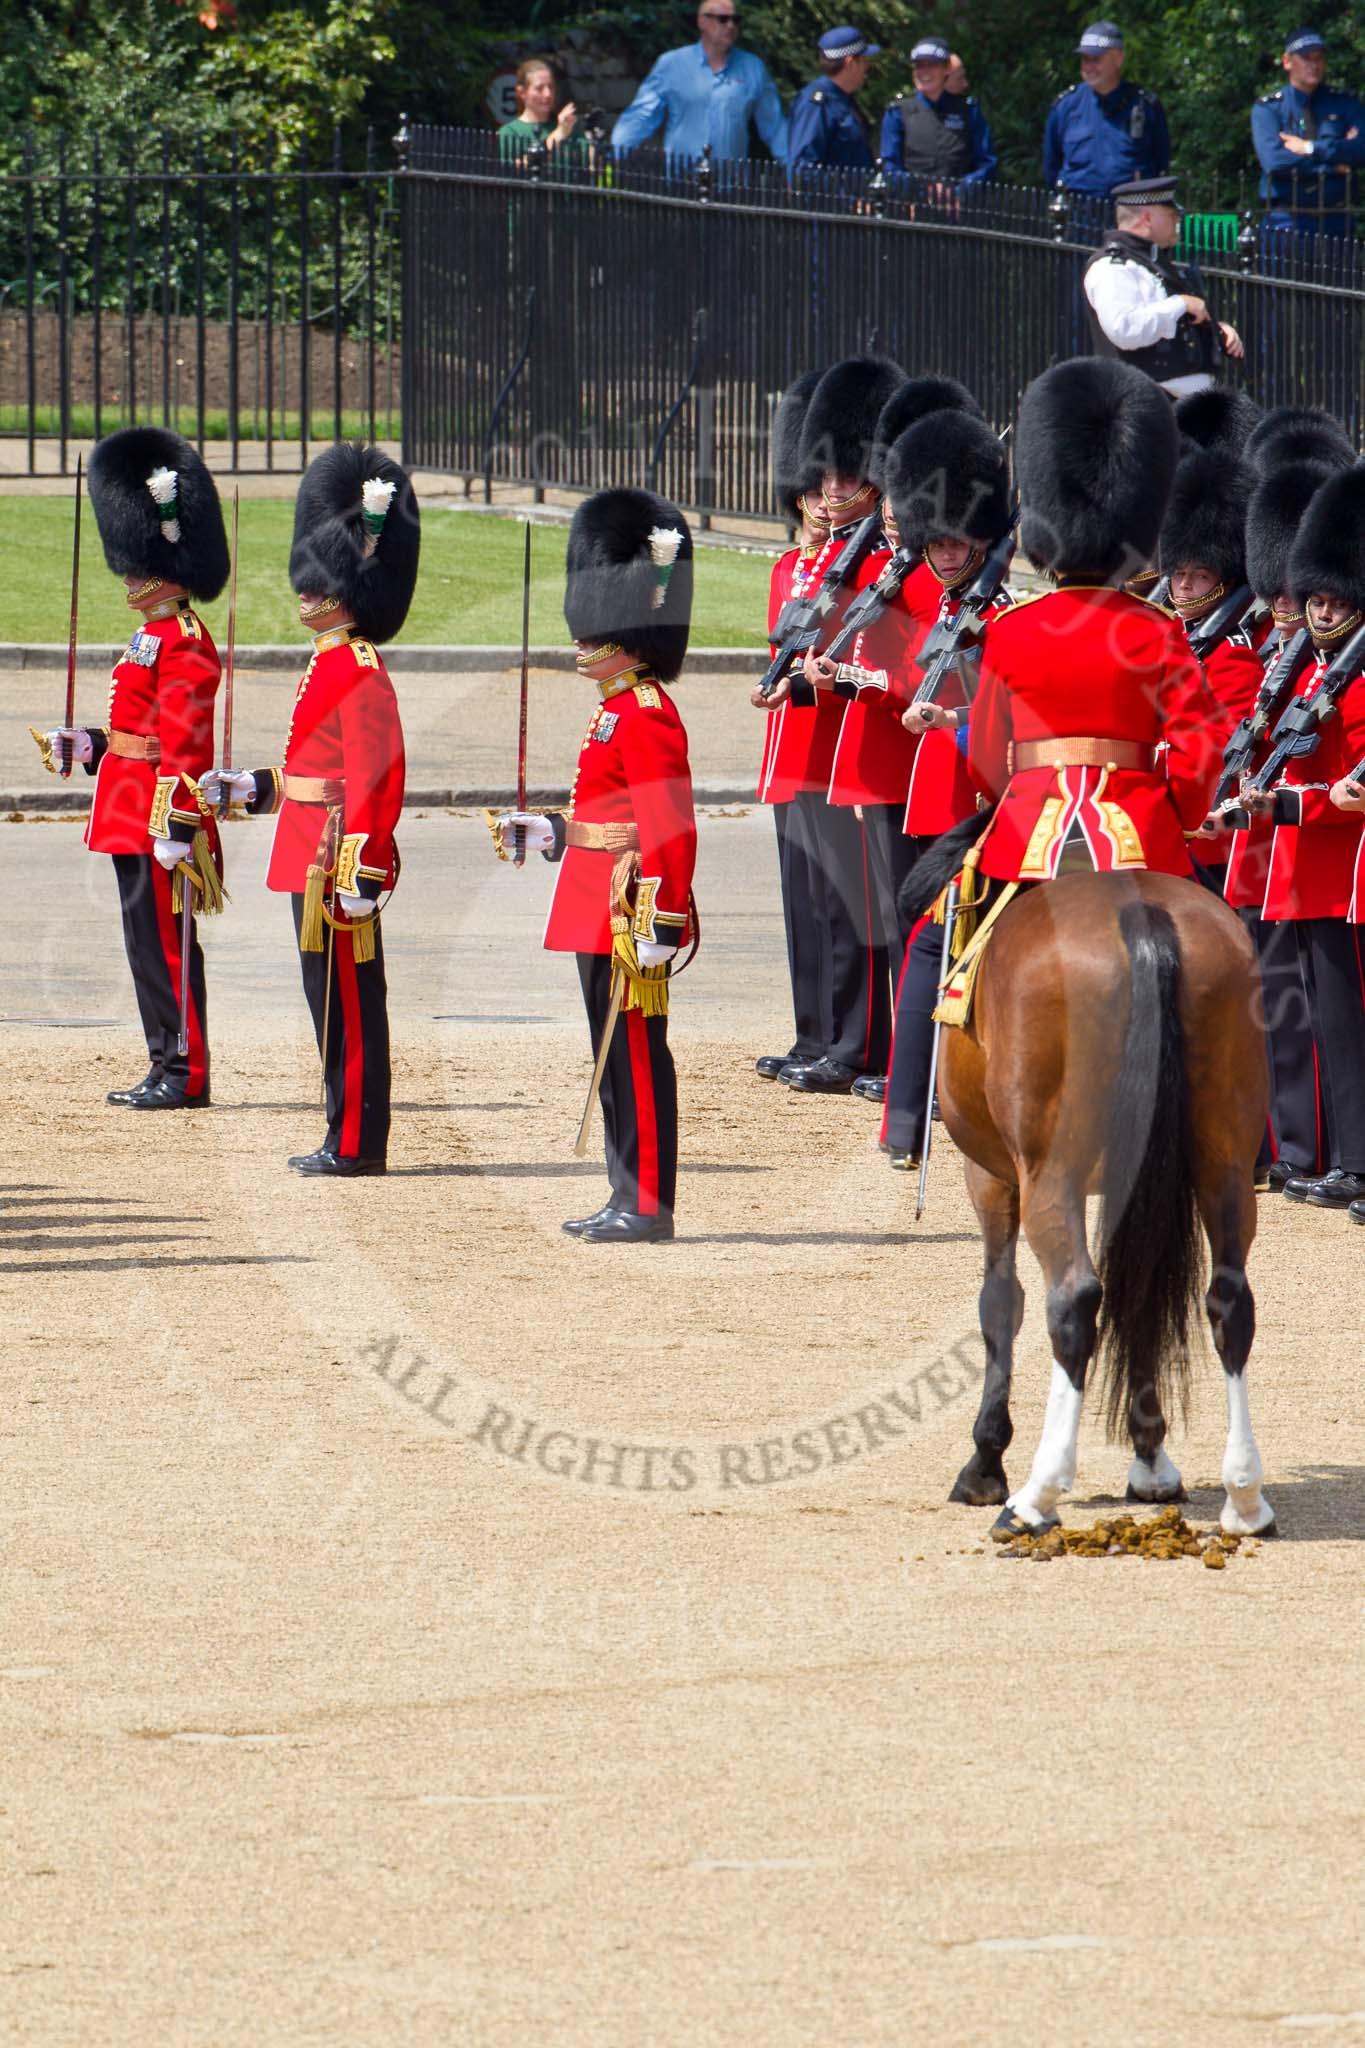 The Colonel's Review 2011: No. 5 Guard, 1st Battalion Welsh Guards. The officers in front, from left to right the Captain of the Guard, Major E J Mellish, the Ensign, Lieutenant F J Wright, and the Subaltern, Captain G C F Charles-Jones..
Horse Guards Parade, Westminster,
London SW1,

United Kingdom,
on 04 June 2011 at 12:04, image #279